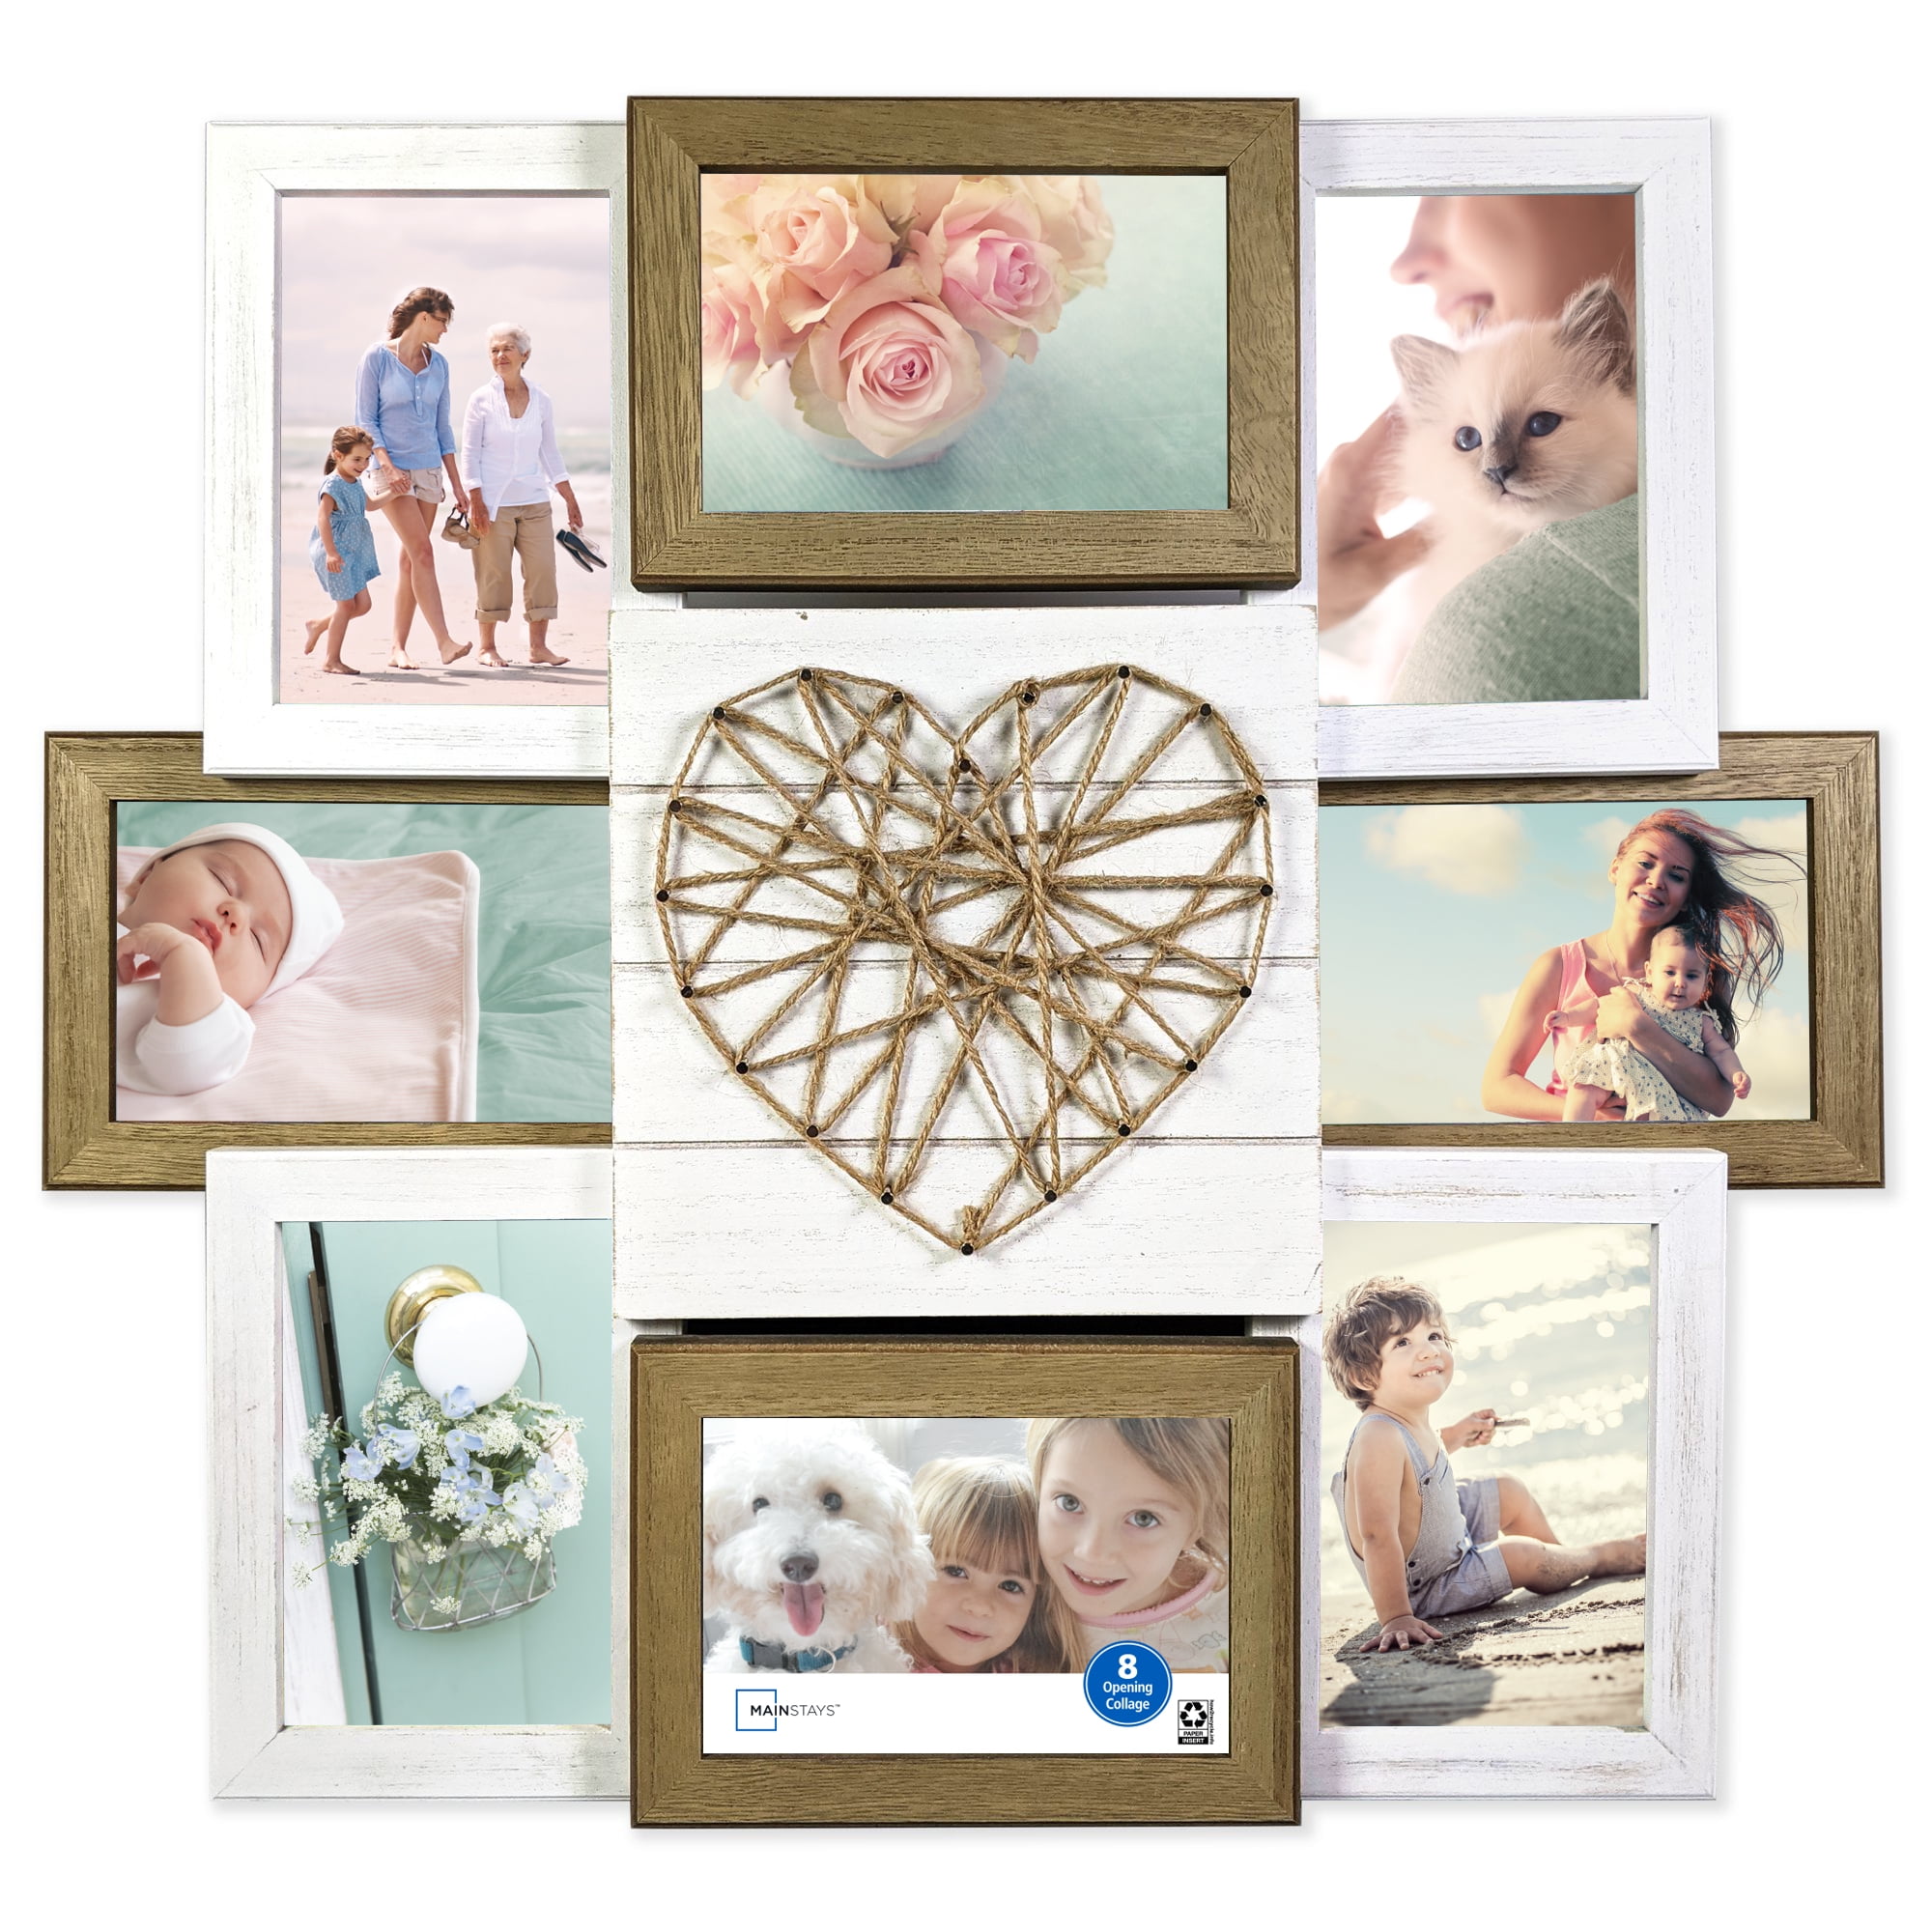 Mainstays 20" x 18" String Heart Rustic 8-Opening Manufactured Wood Collage Frame